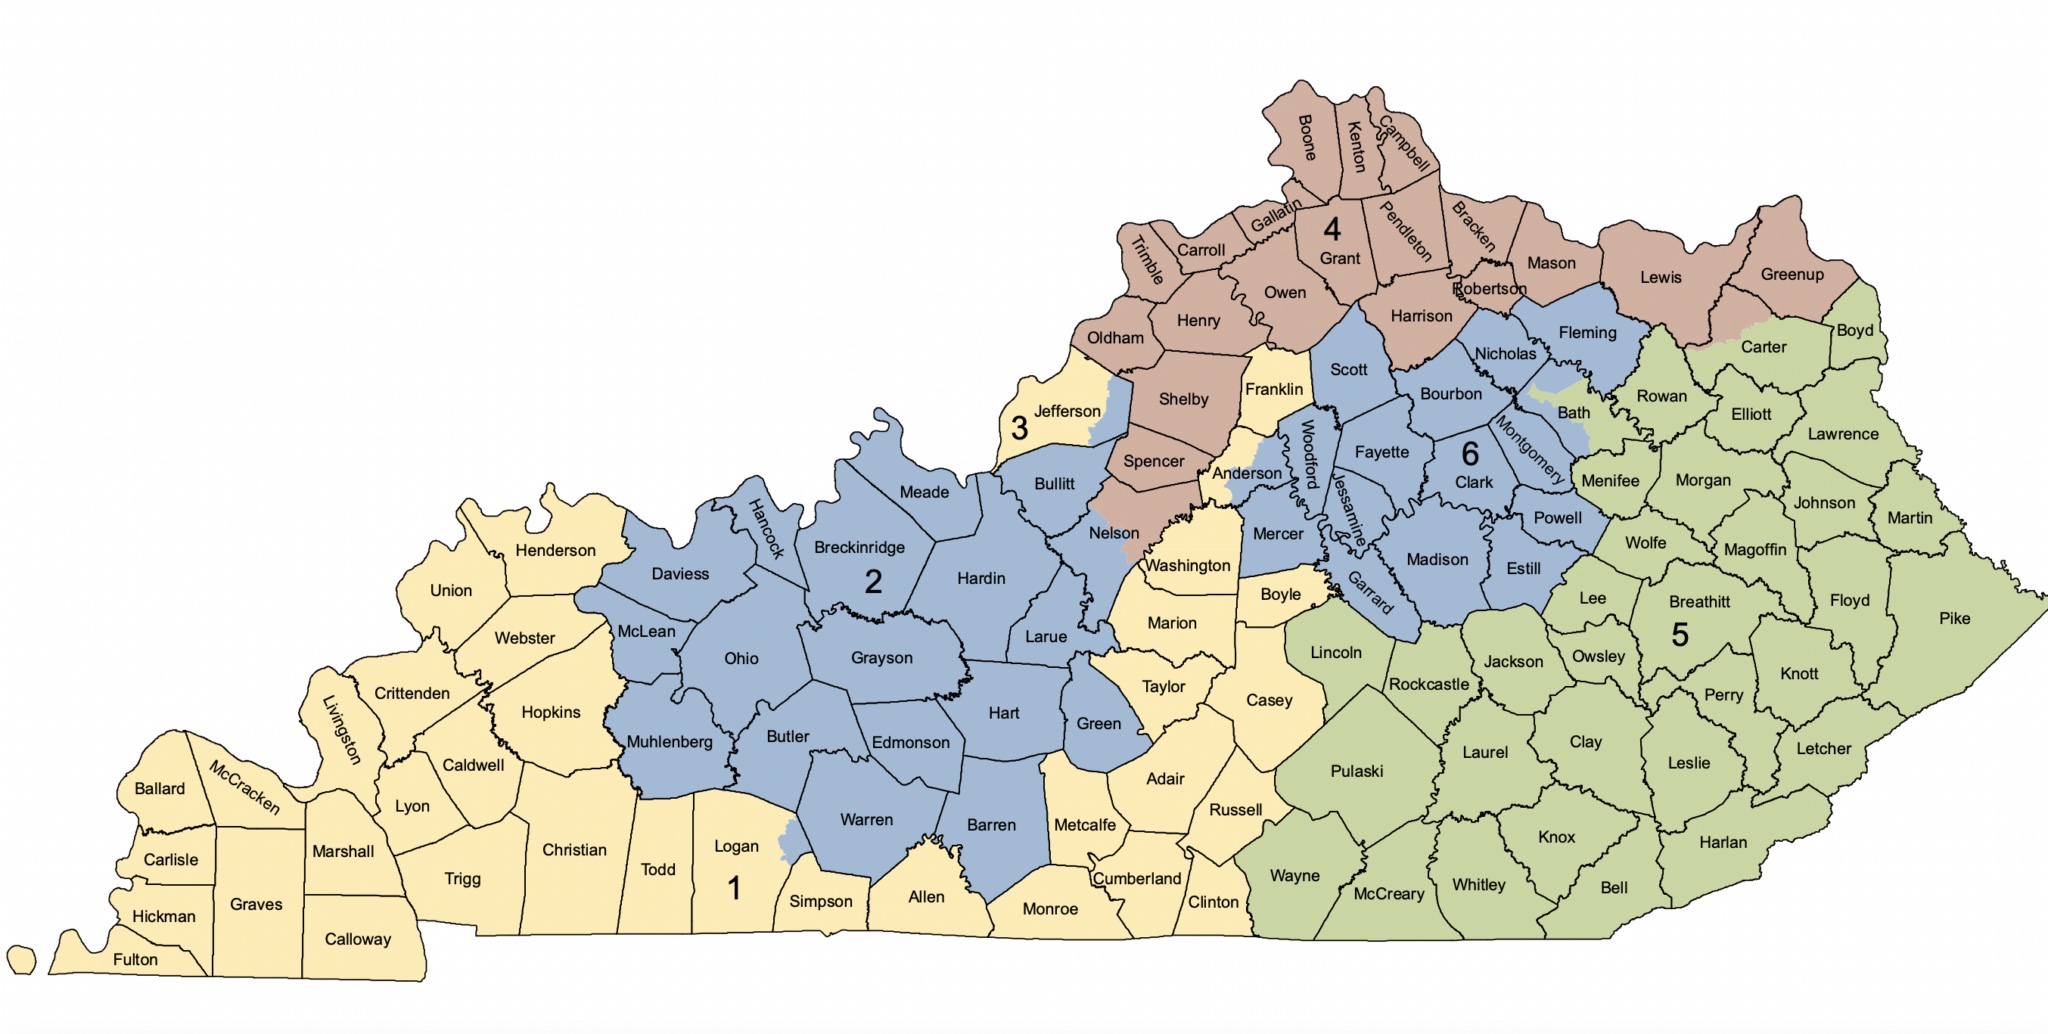 The boundaries of Kentucky’s six congressional districts, redrawn in 2022, are being challenged before the Kentucky Supreme Court, which will hear arguments in the case Sept. 19. Of special interest is what political scientist Stephen Voss calls the “Comer hook,” extending the 1st Congressional District from the Mississippi River to Frankfort. (Kentucky Legislative Research Commission image)